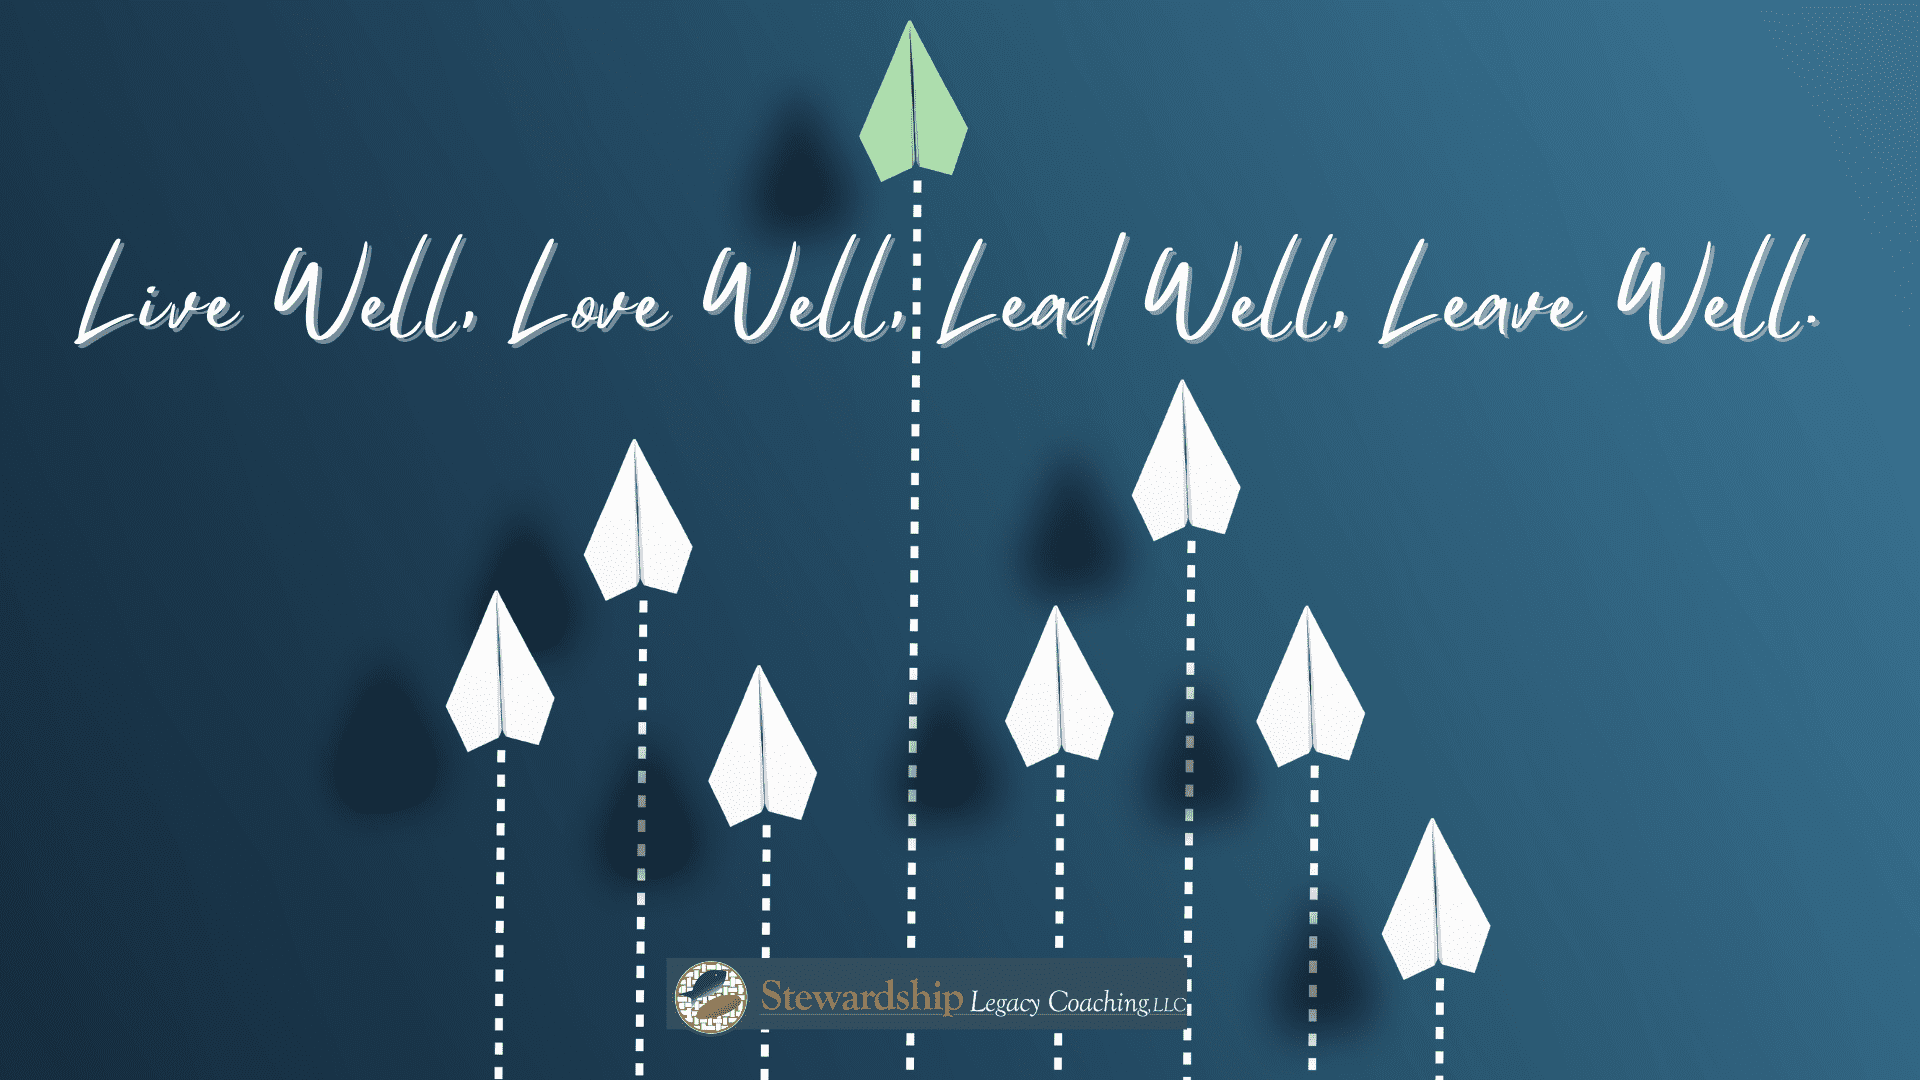 Live well, Love Well, Lead Well, Leave Well